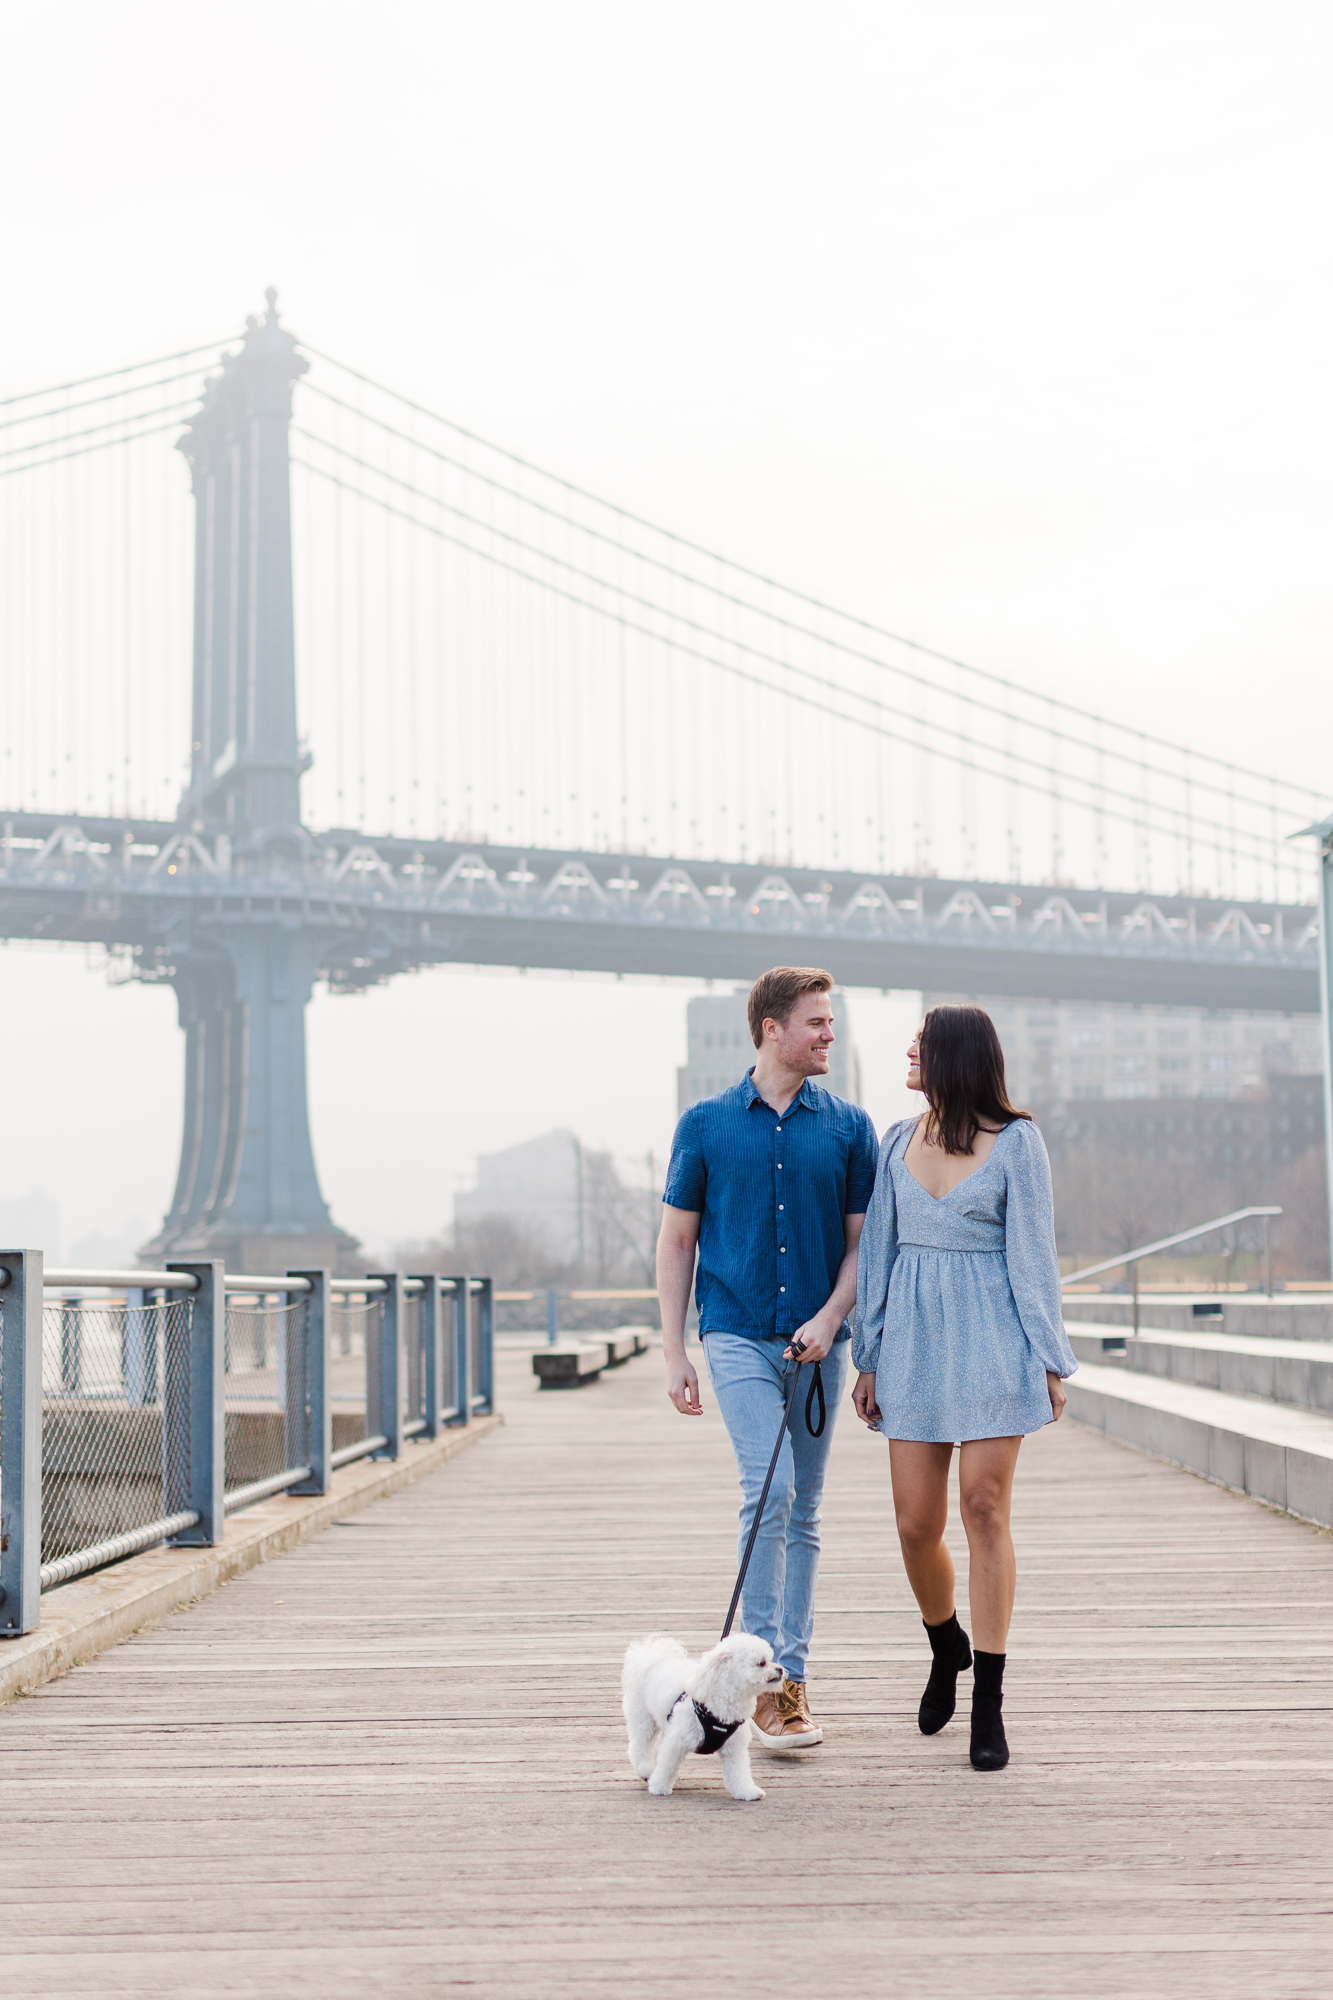 When to book an Engagement Photographer